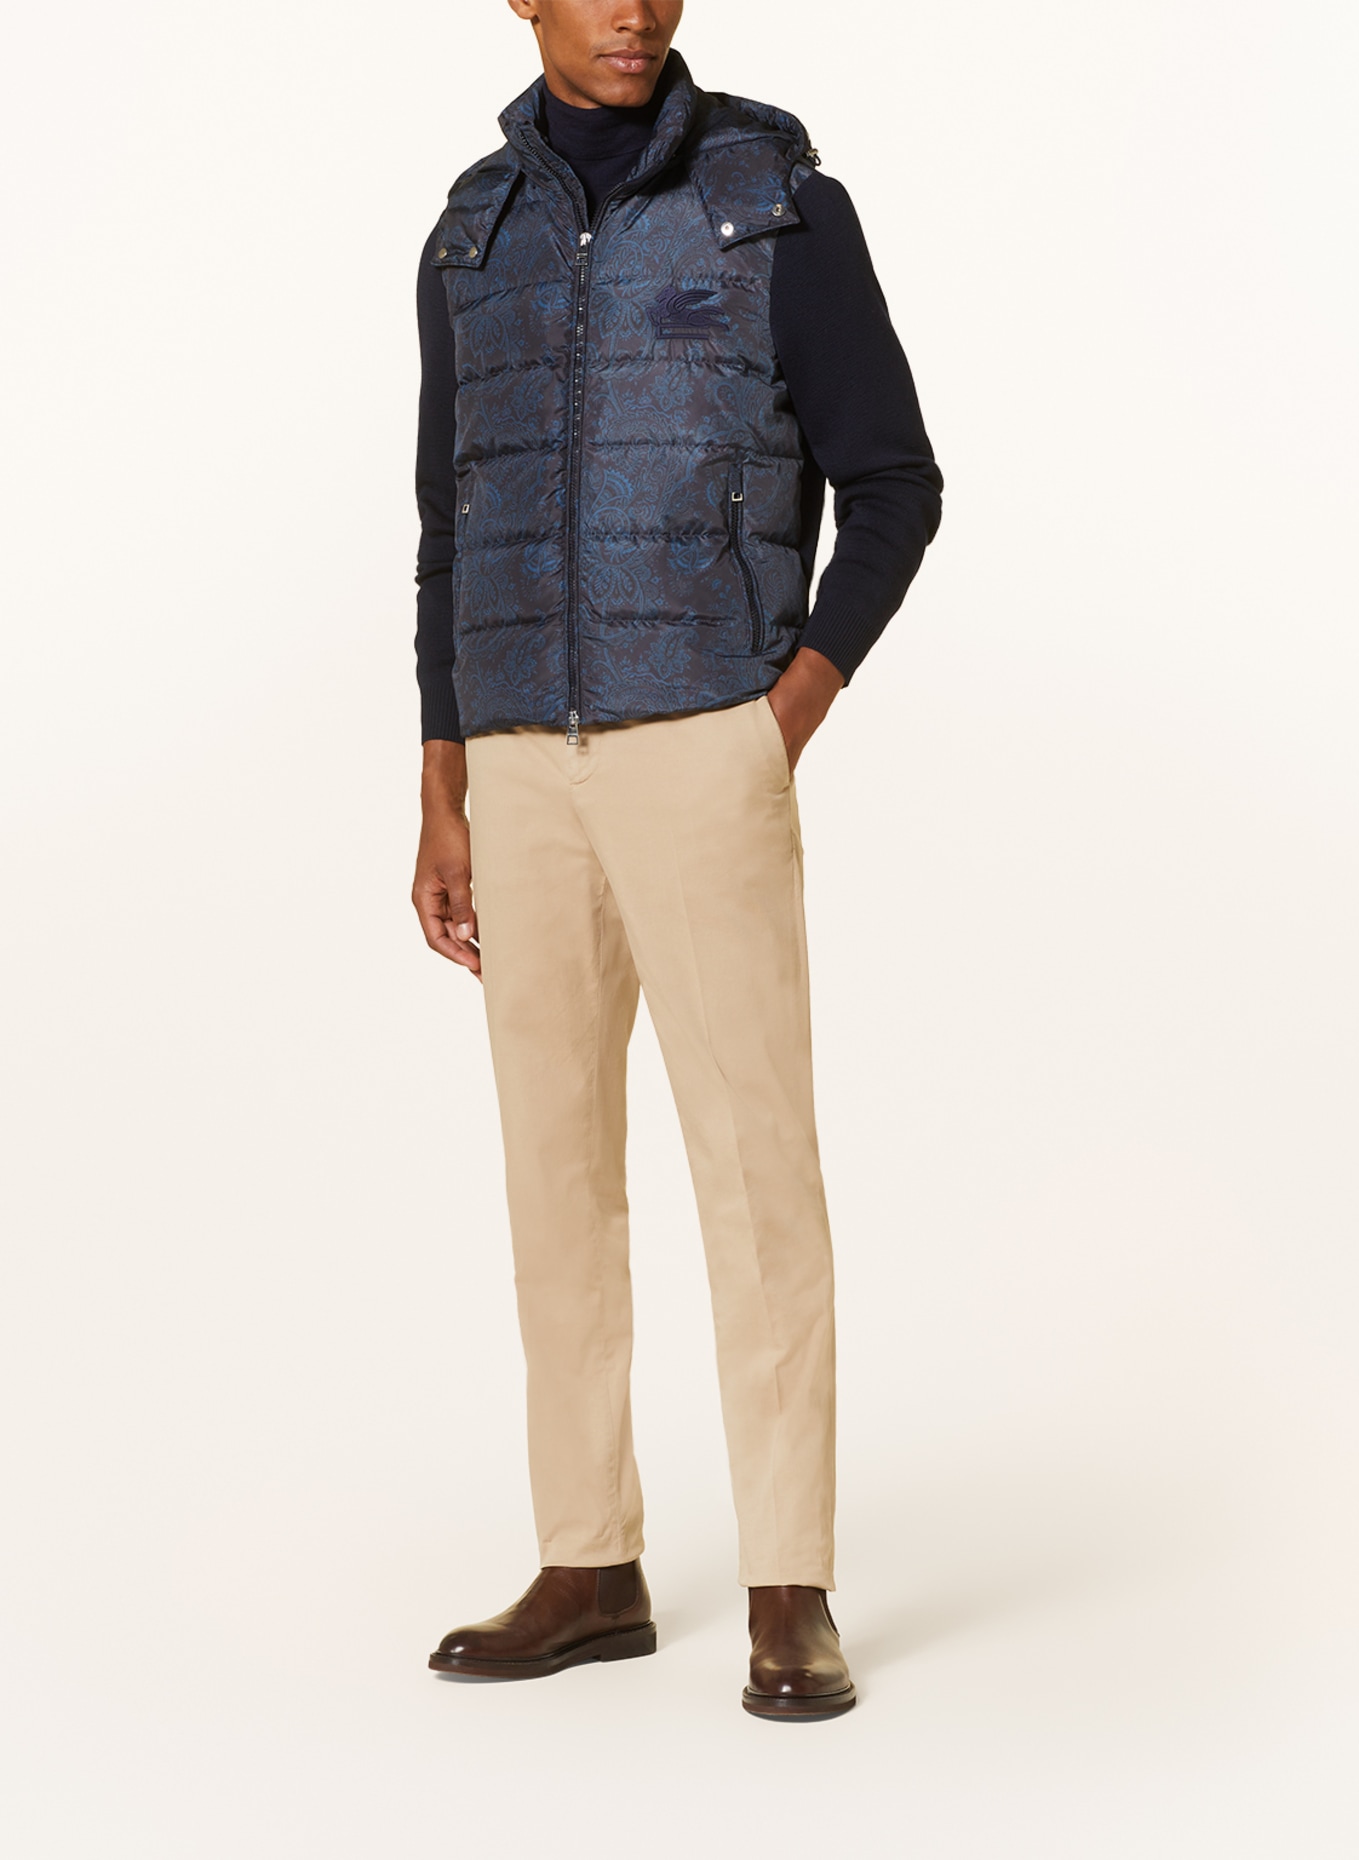 ETRO Quilted jacket in mixed materials with detachable hood, Color: DARK BLUE/ LIGHT BLUE/ GRAY (Image 2)